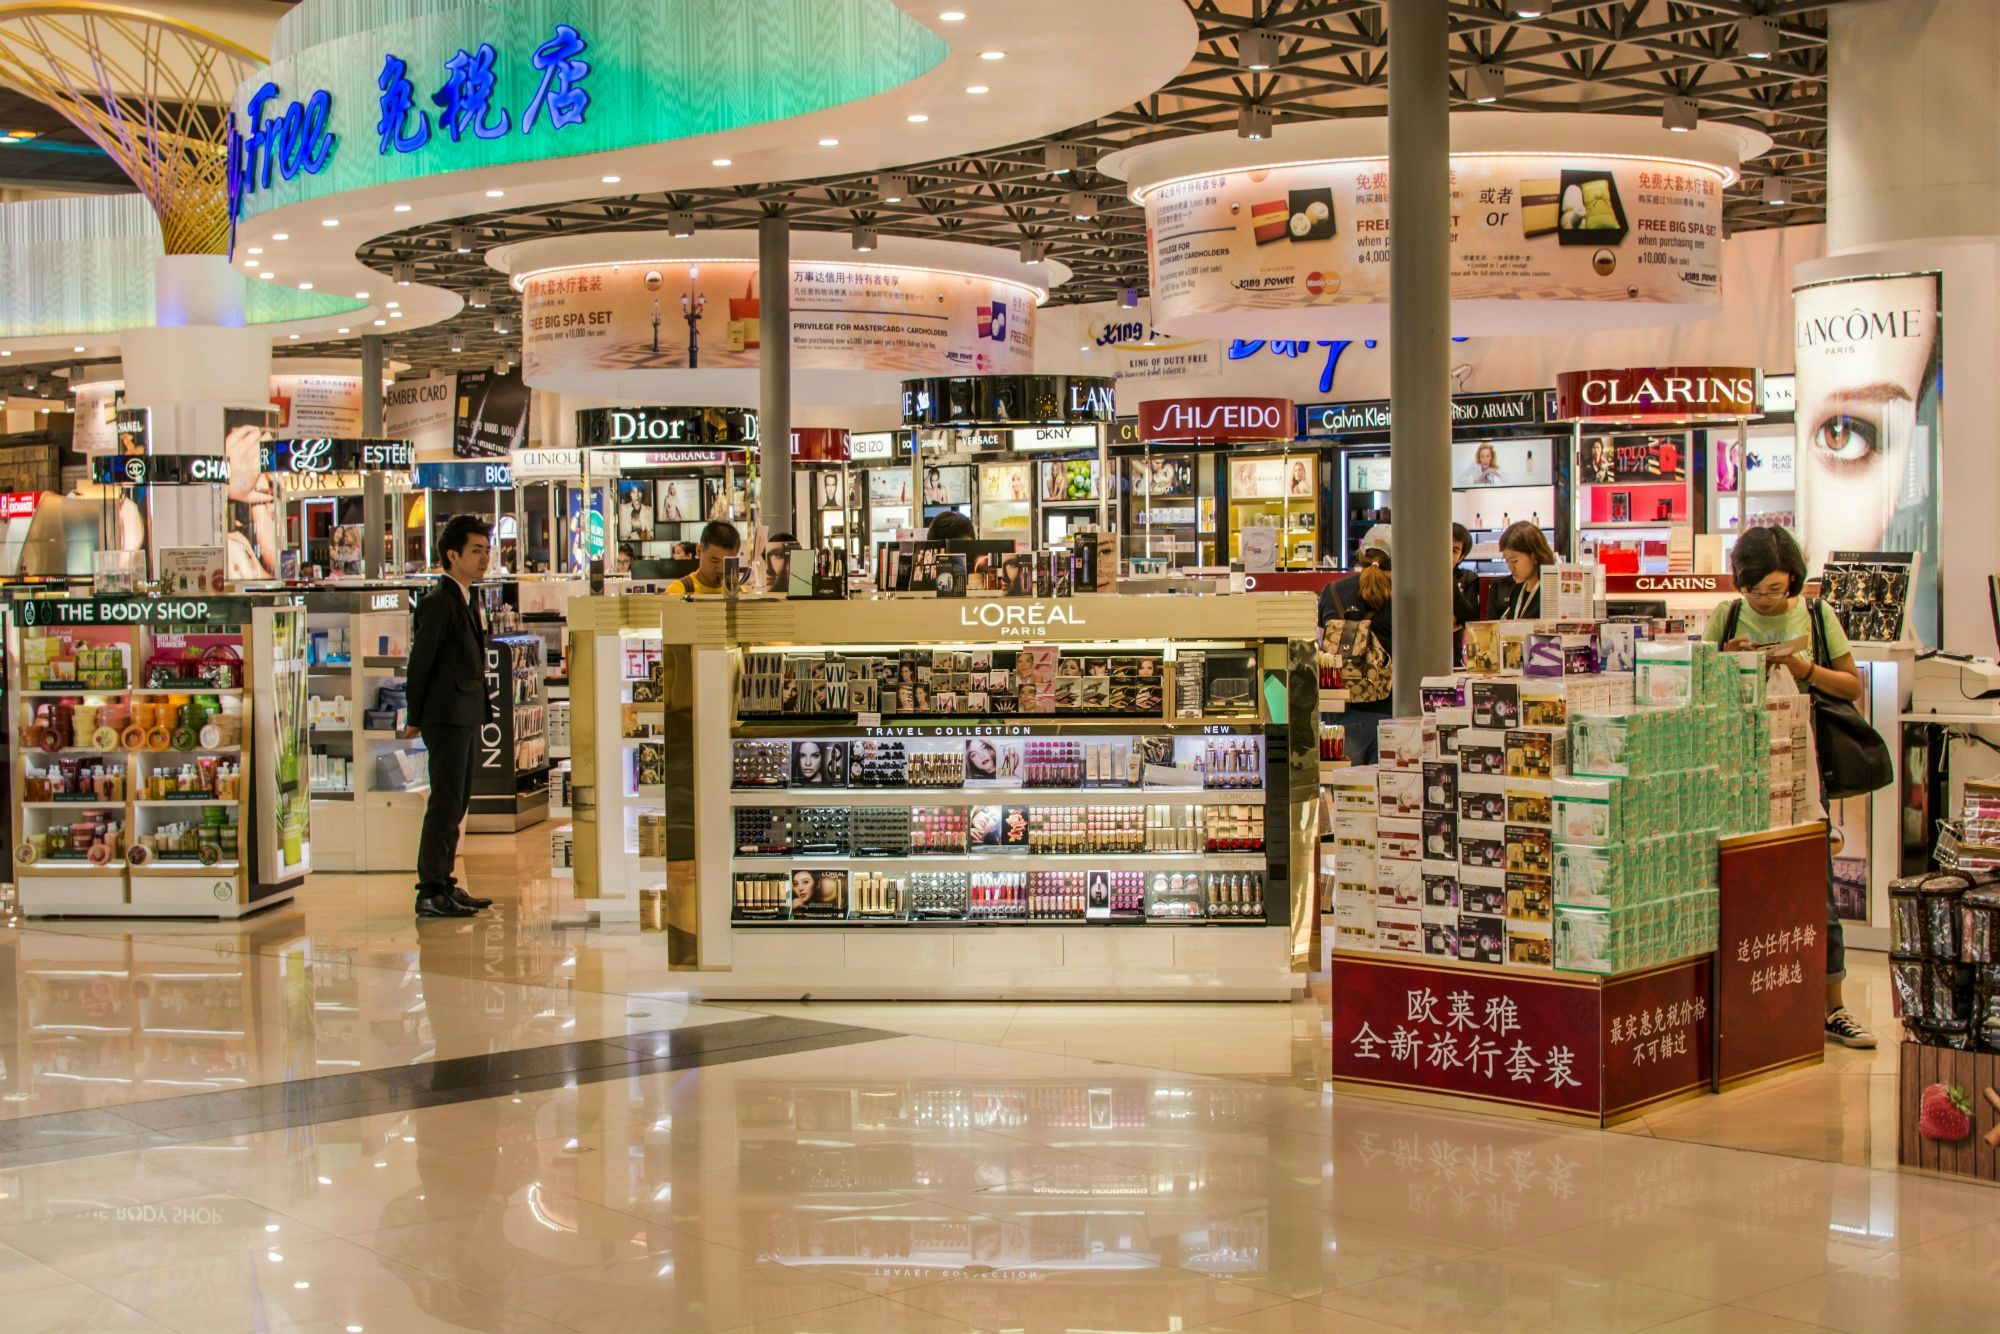 Chinese Shoppers to Make Asia Surpass Europe for Duty-Free Market Share by 2020